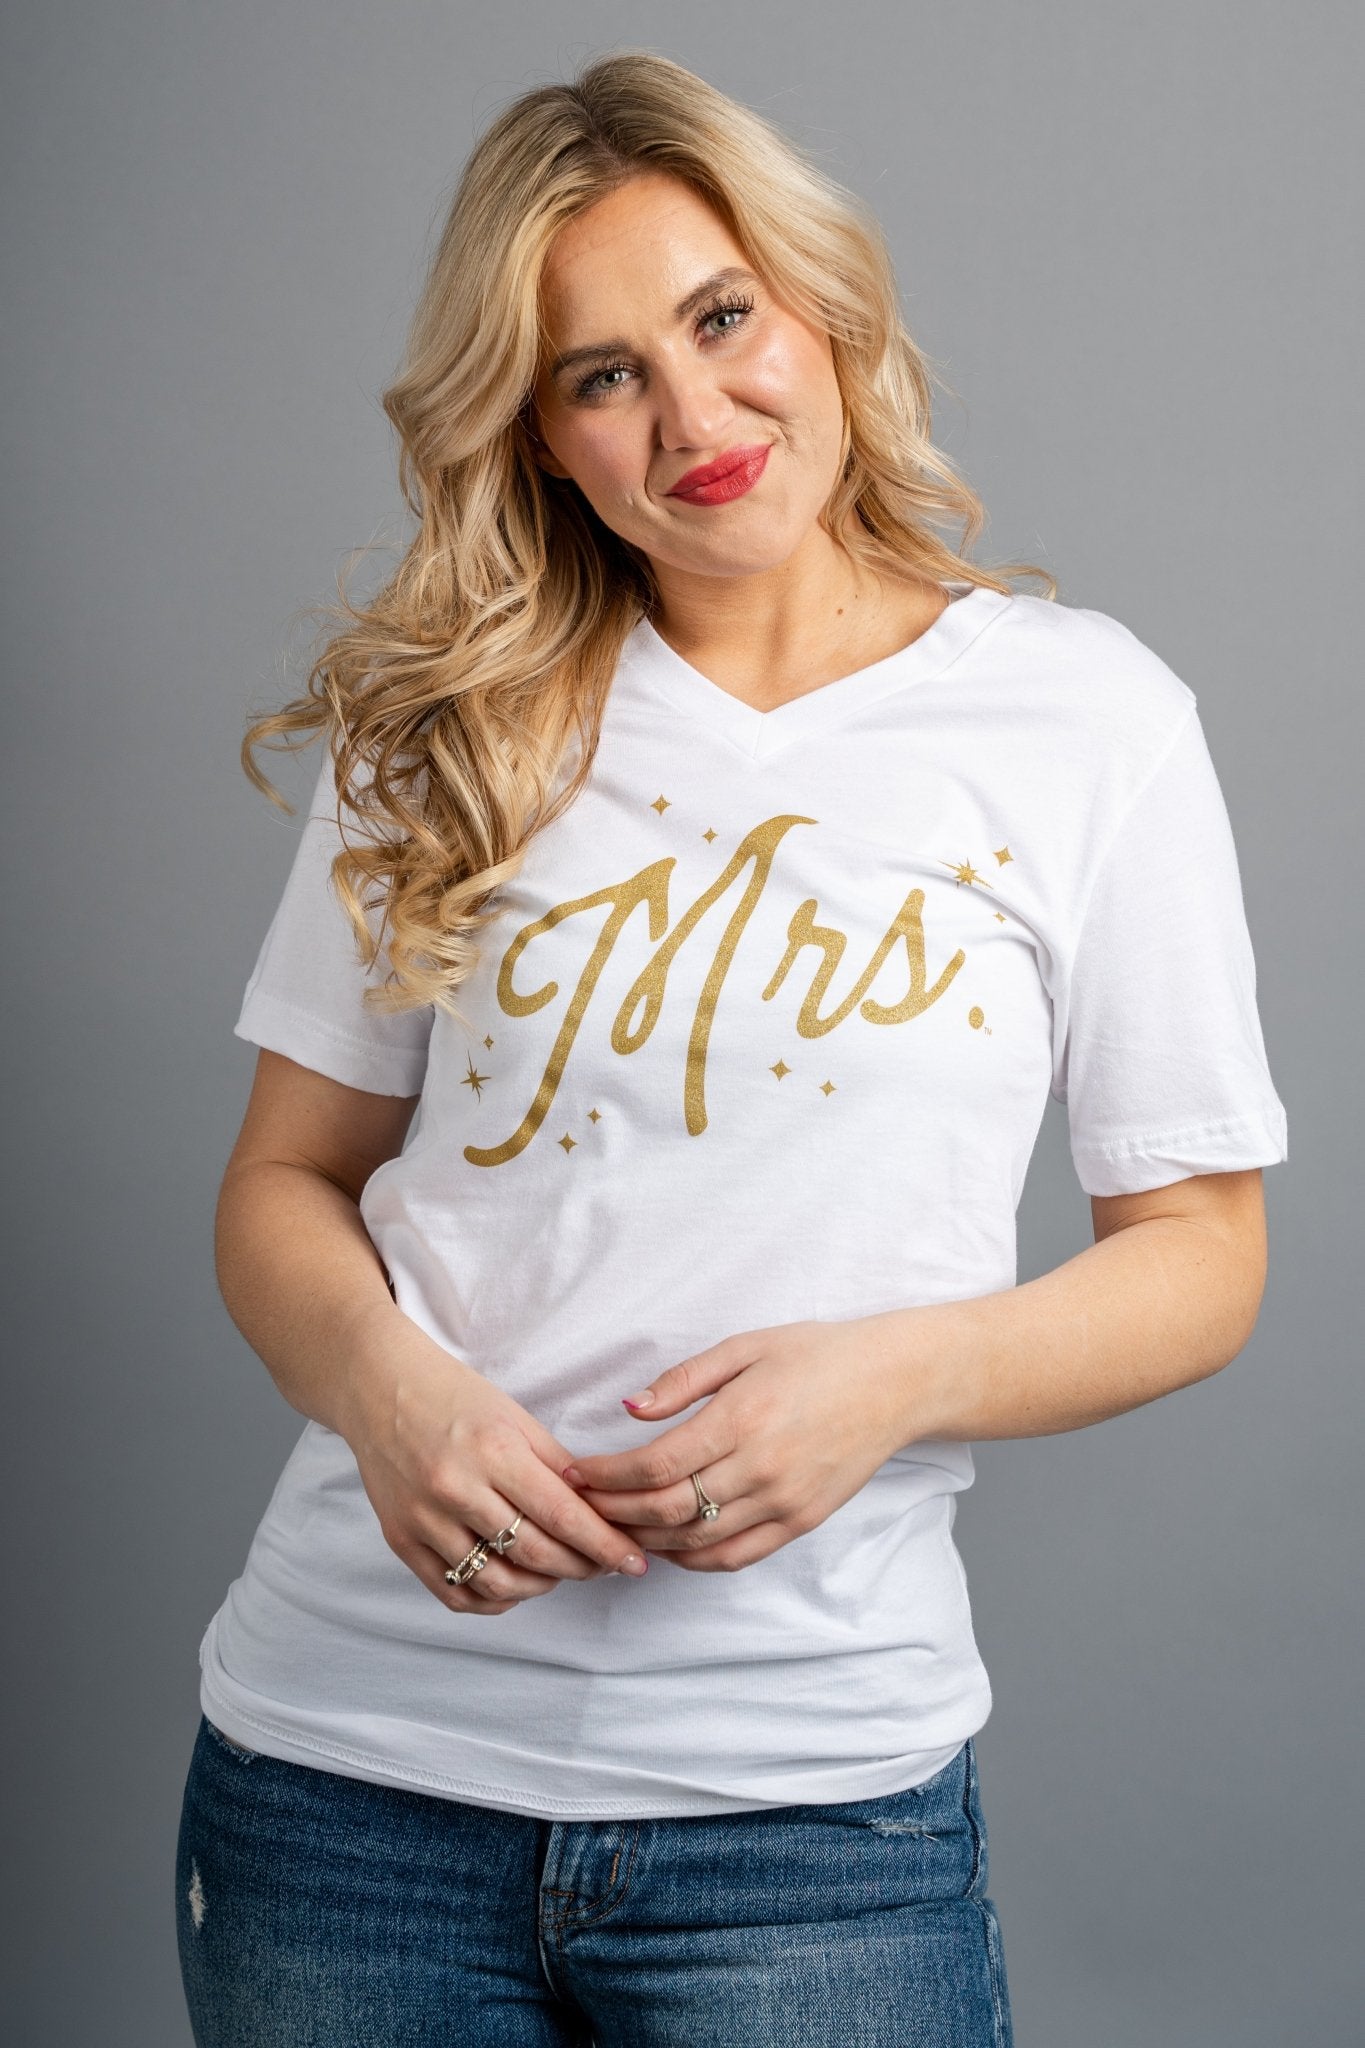 Mrs Script v-neck short sleeve t-shirt white - Trendy t-shirt - Cute Graphic Tee Fashion at Lush Fashion Lounge Boutique in Oklahoma